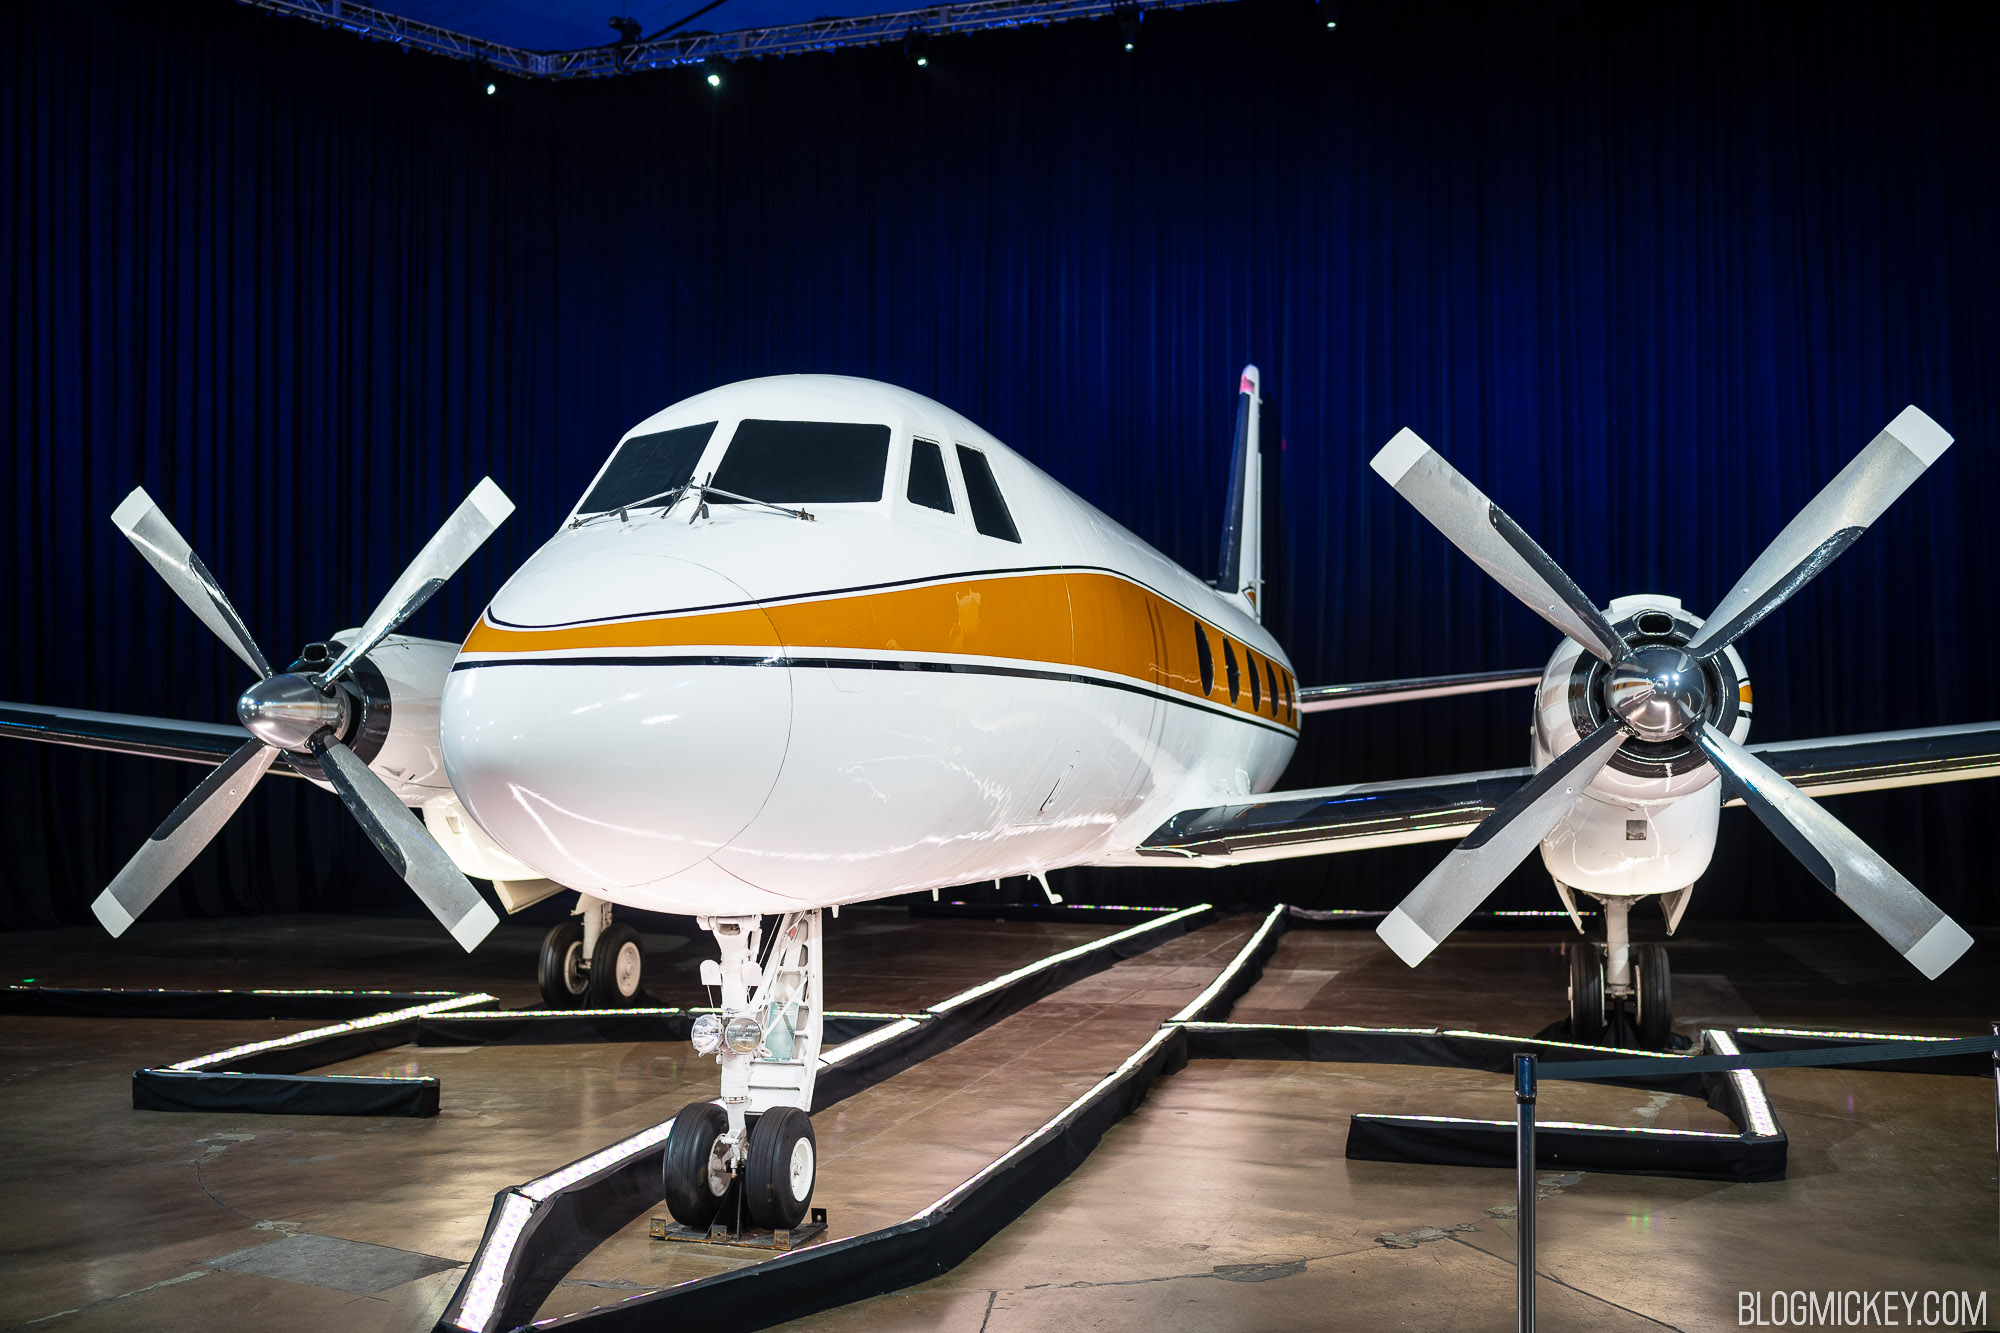 80+ Photos of 'Mickey Mouse One: Walt's Plane' Exhibit at D23 Expo 2022